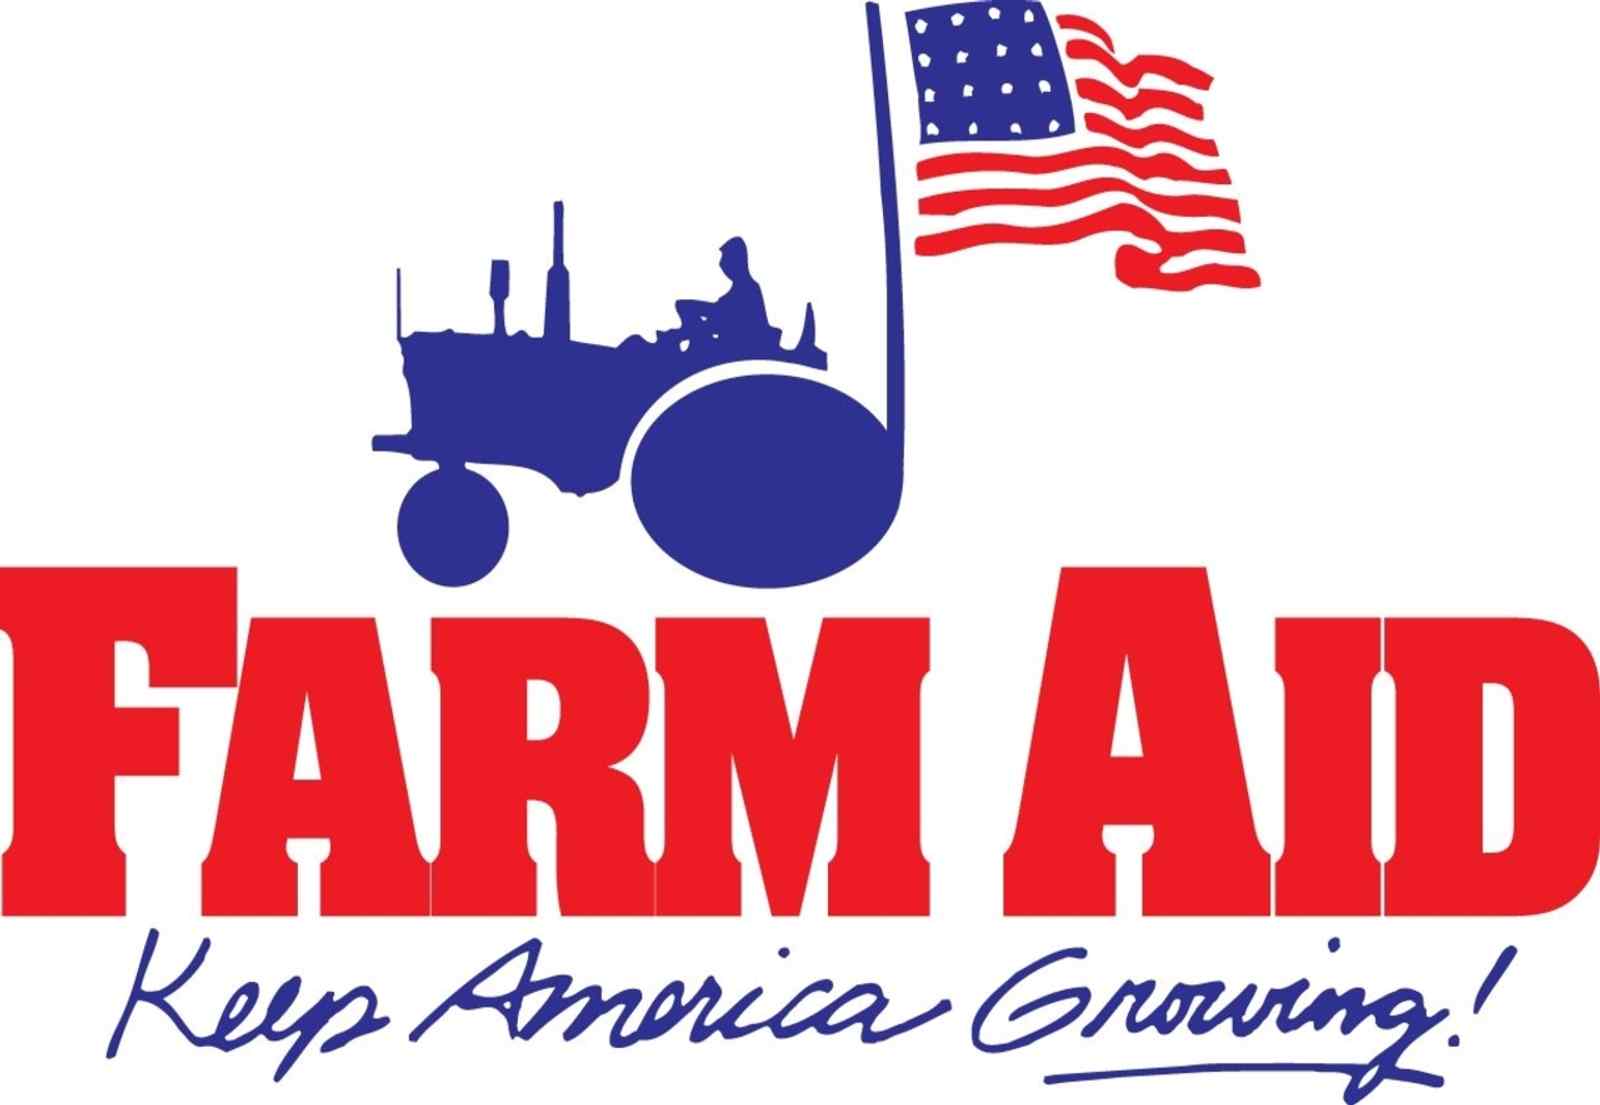 Farm Aid Co-Founder John Mellencamp To Join Farmers In D.C. March 7th In Support Of Climate Resilience